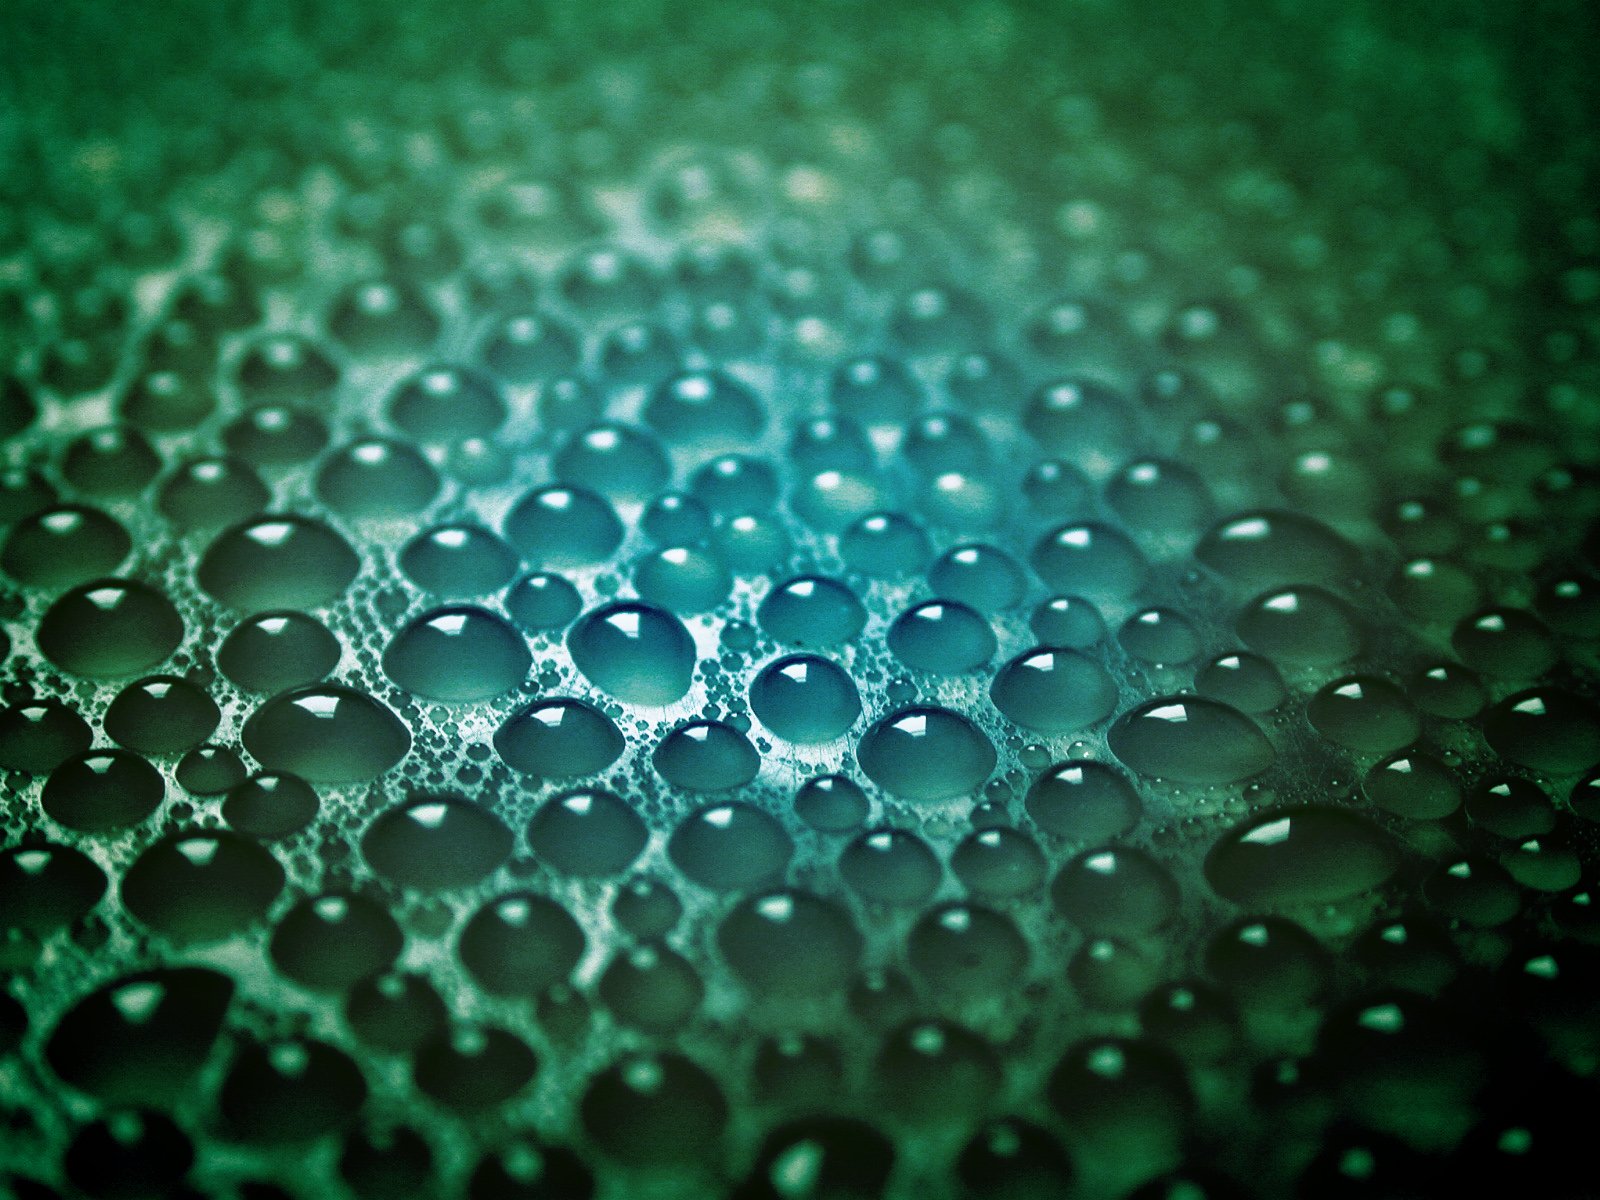 a close up view of water droplets and the surface